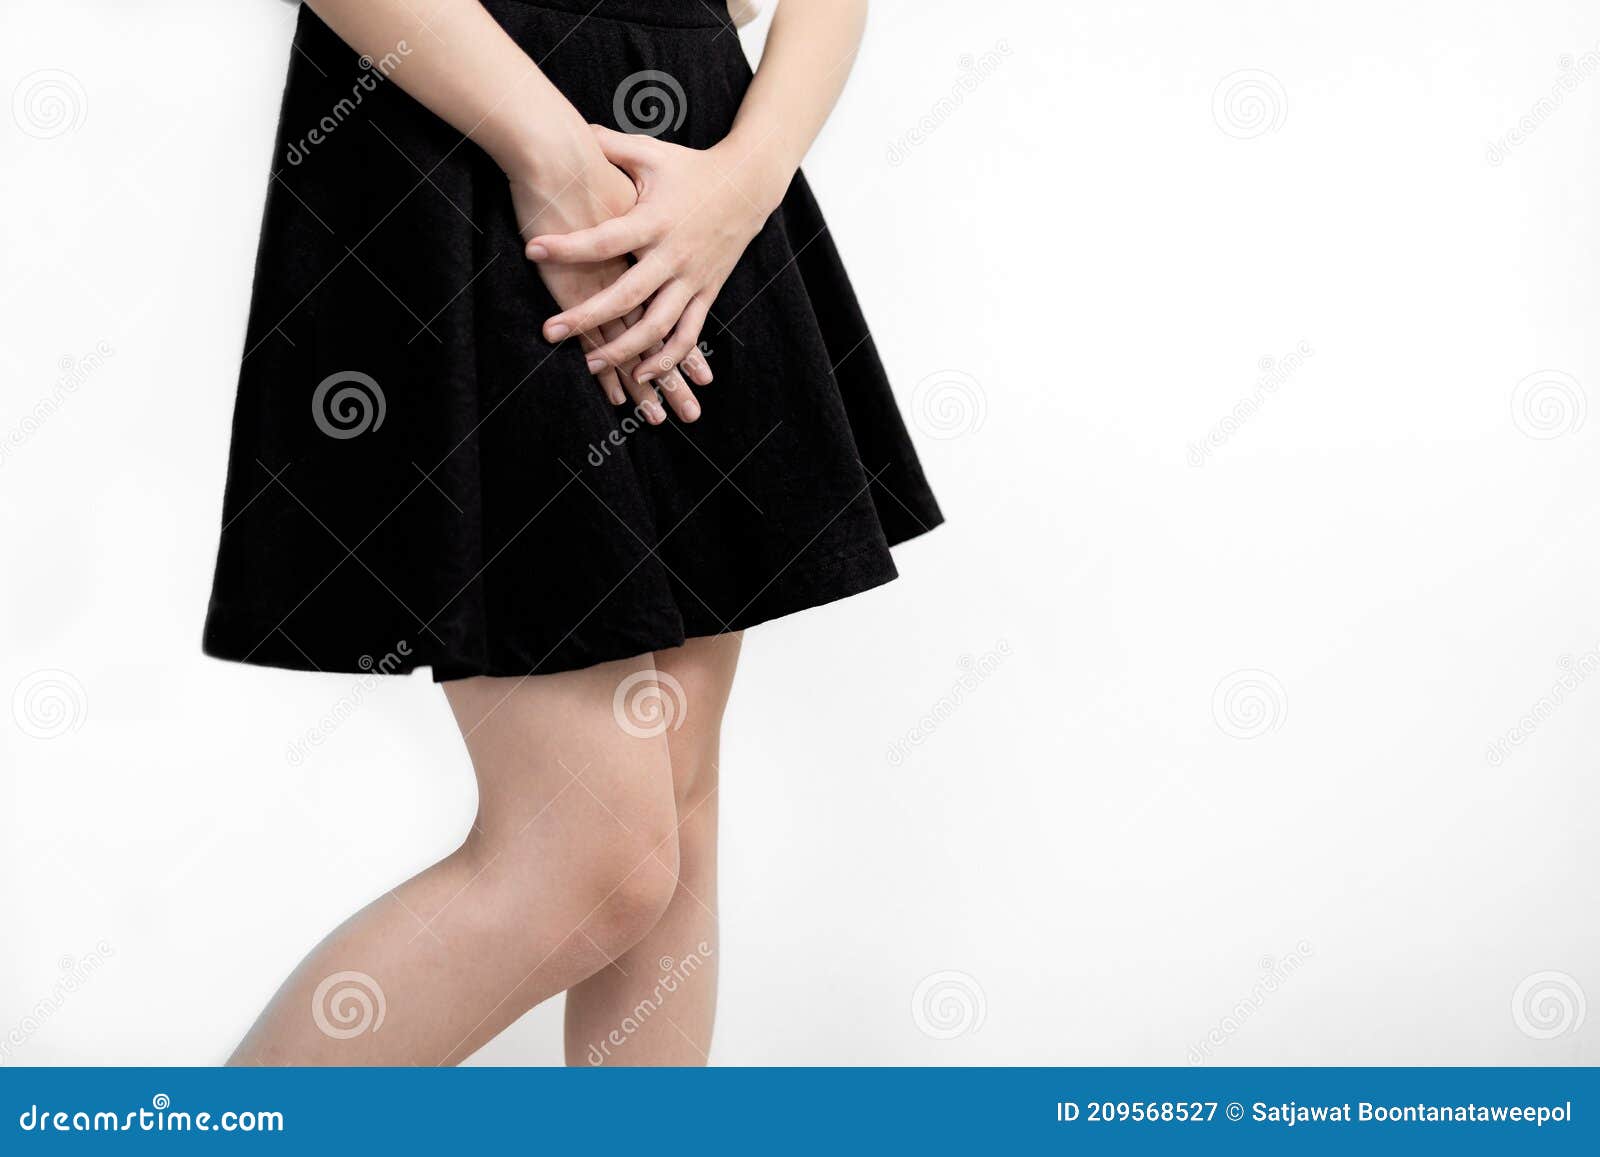 lady girl with leucorrhoea,vaginitis,bacterial infection,young woman cover crotch or hold over her vagina with hands,vaginal